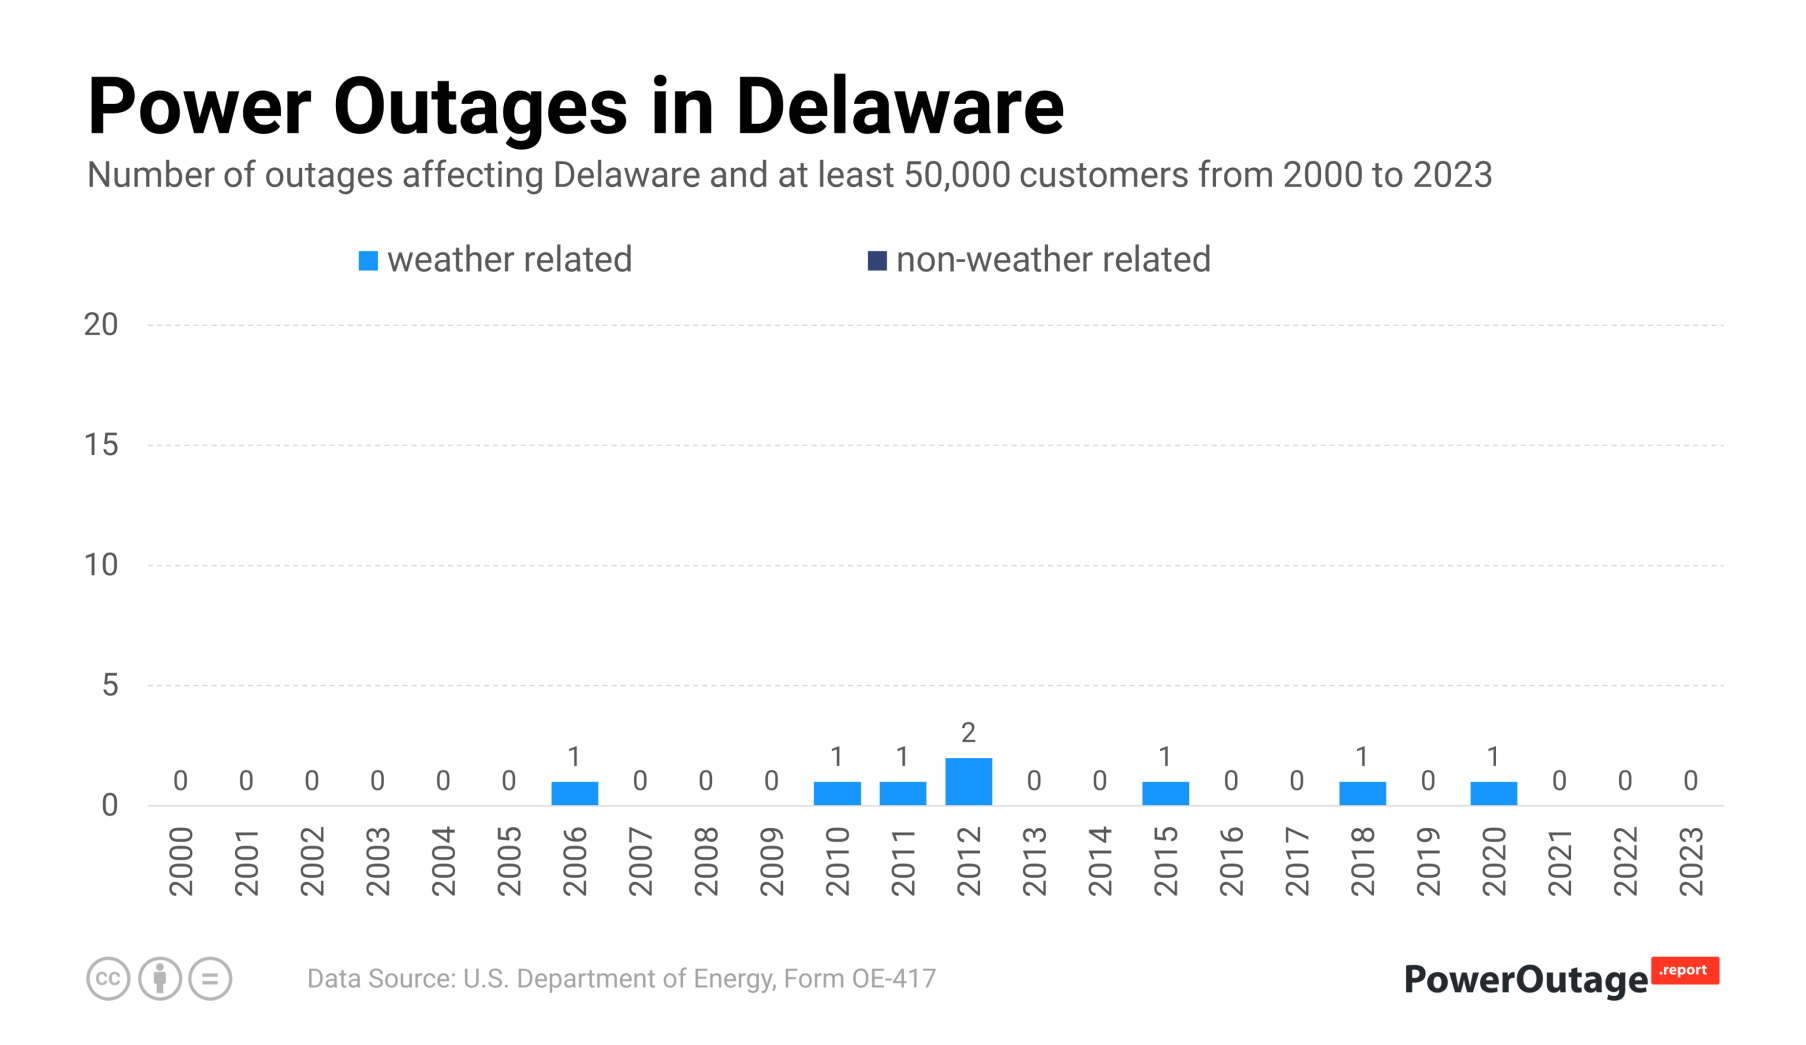 Delaware Power Outage Statistics (2000 - 2021)